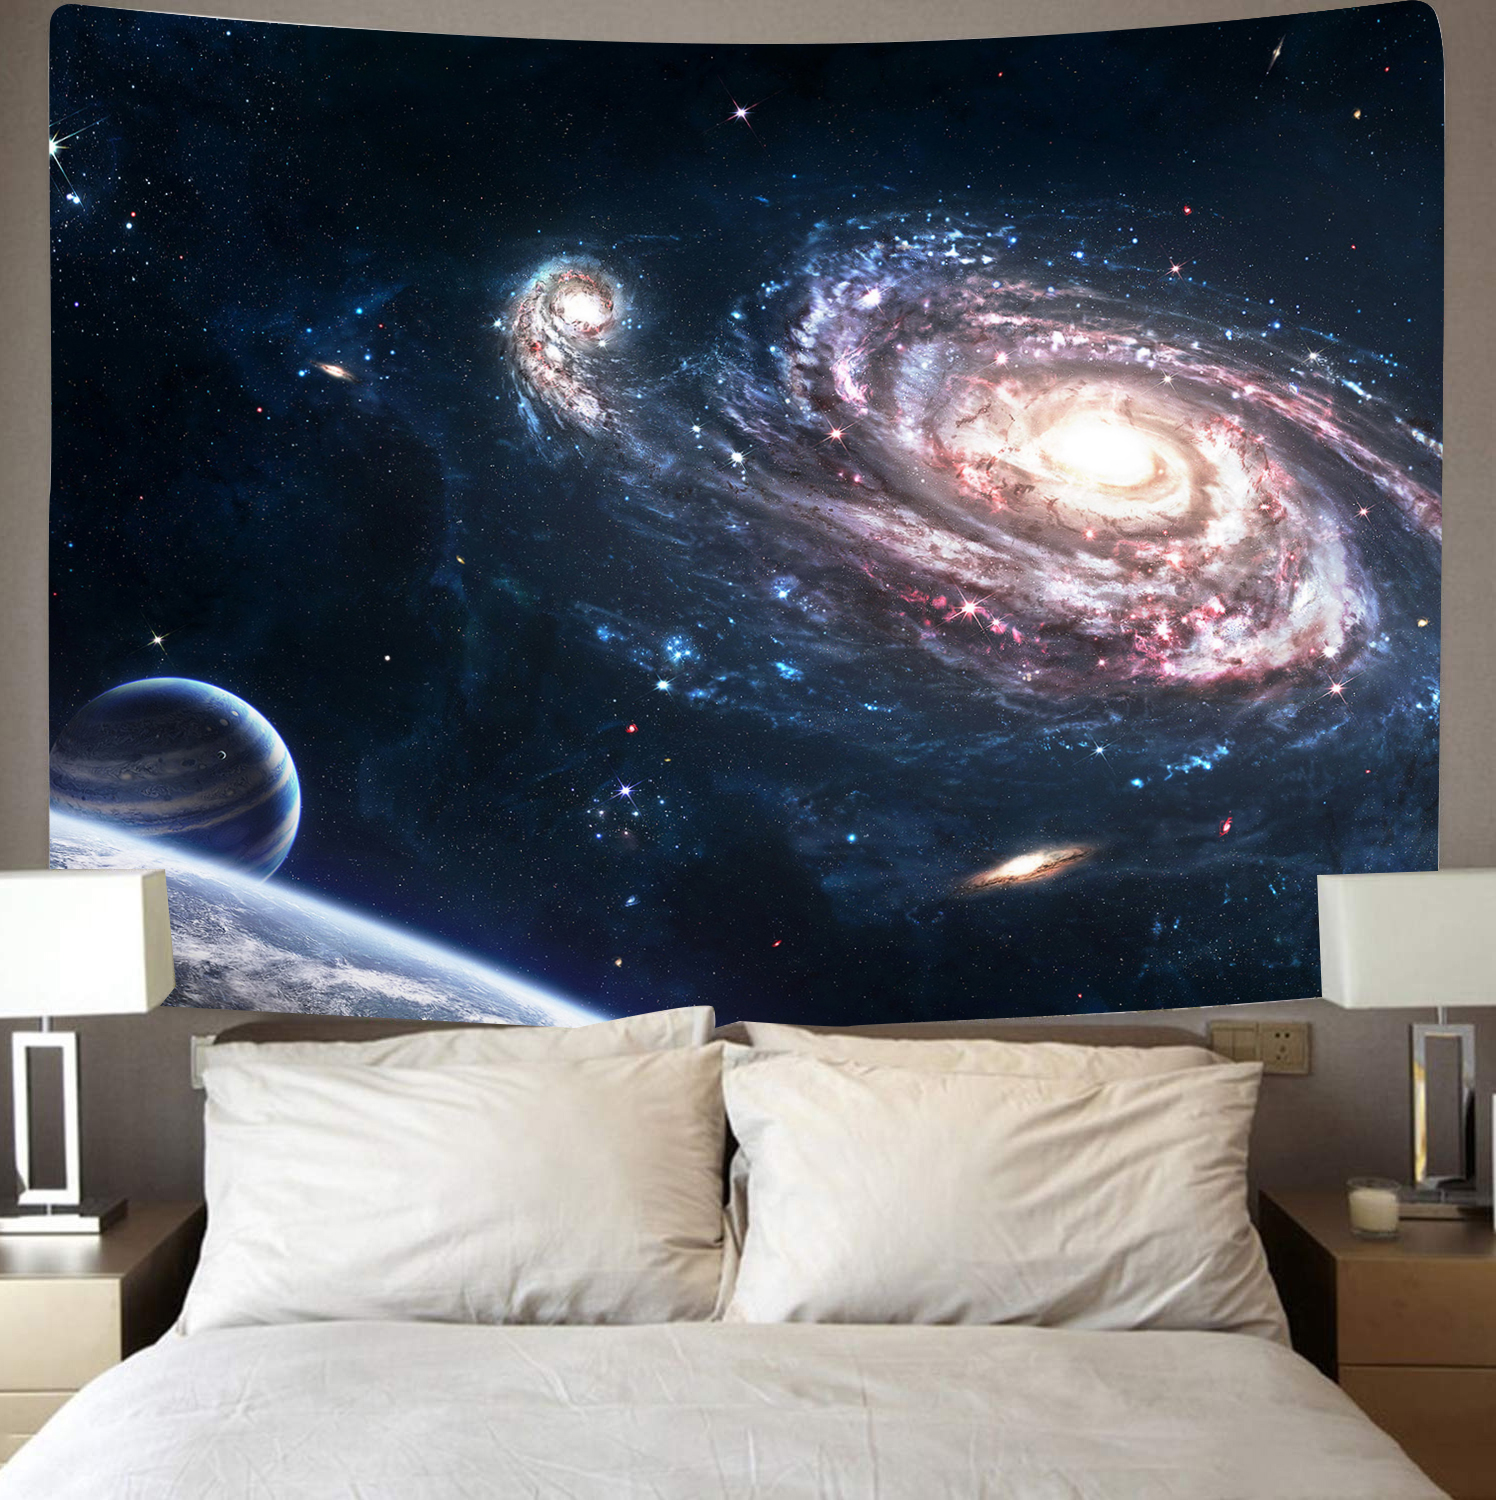 Cosmic Starrysky Nature Landscape Tapestry Wall Hanging For Room, Sold As 1 Panel